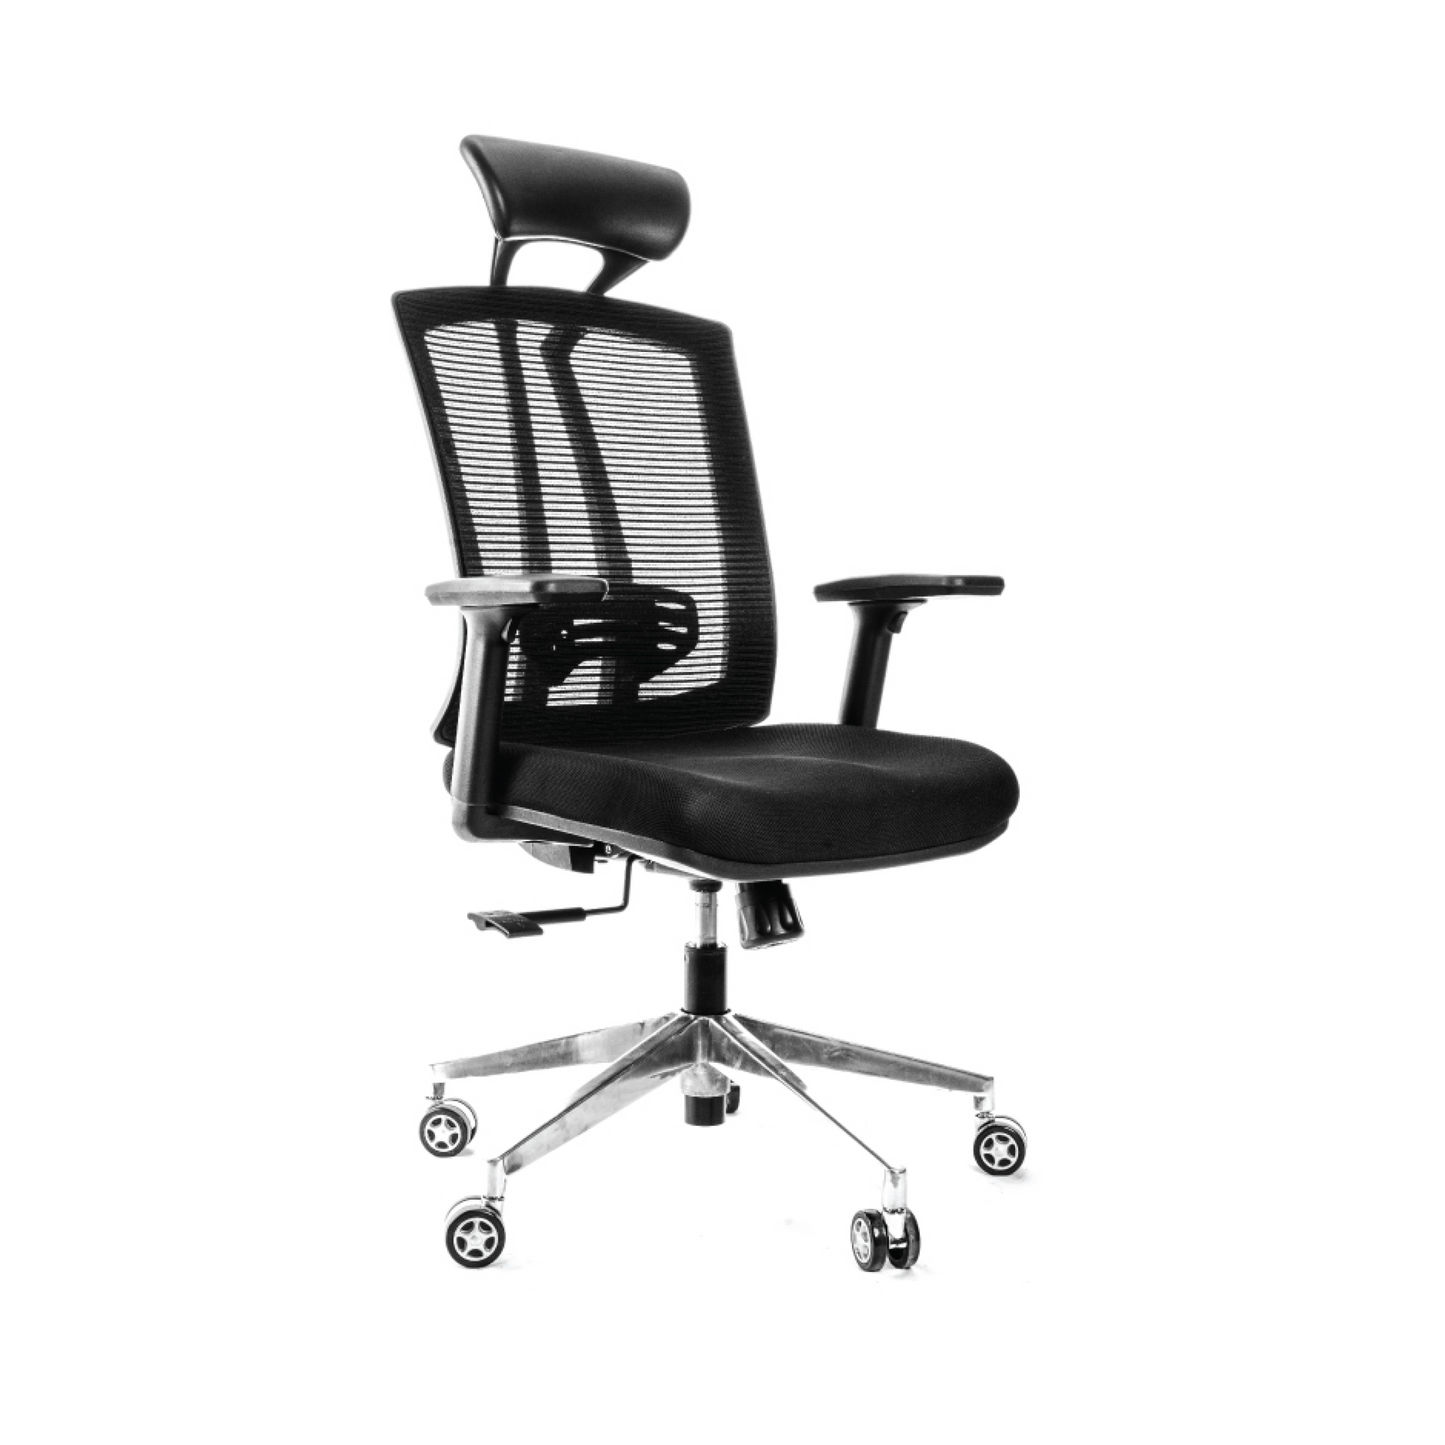 Office Executive Chair - Model No - KP-Zebra-HB-ZX | Buy Office Chair online